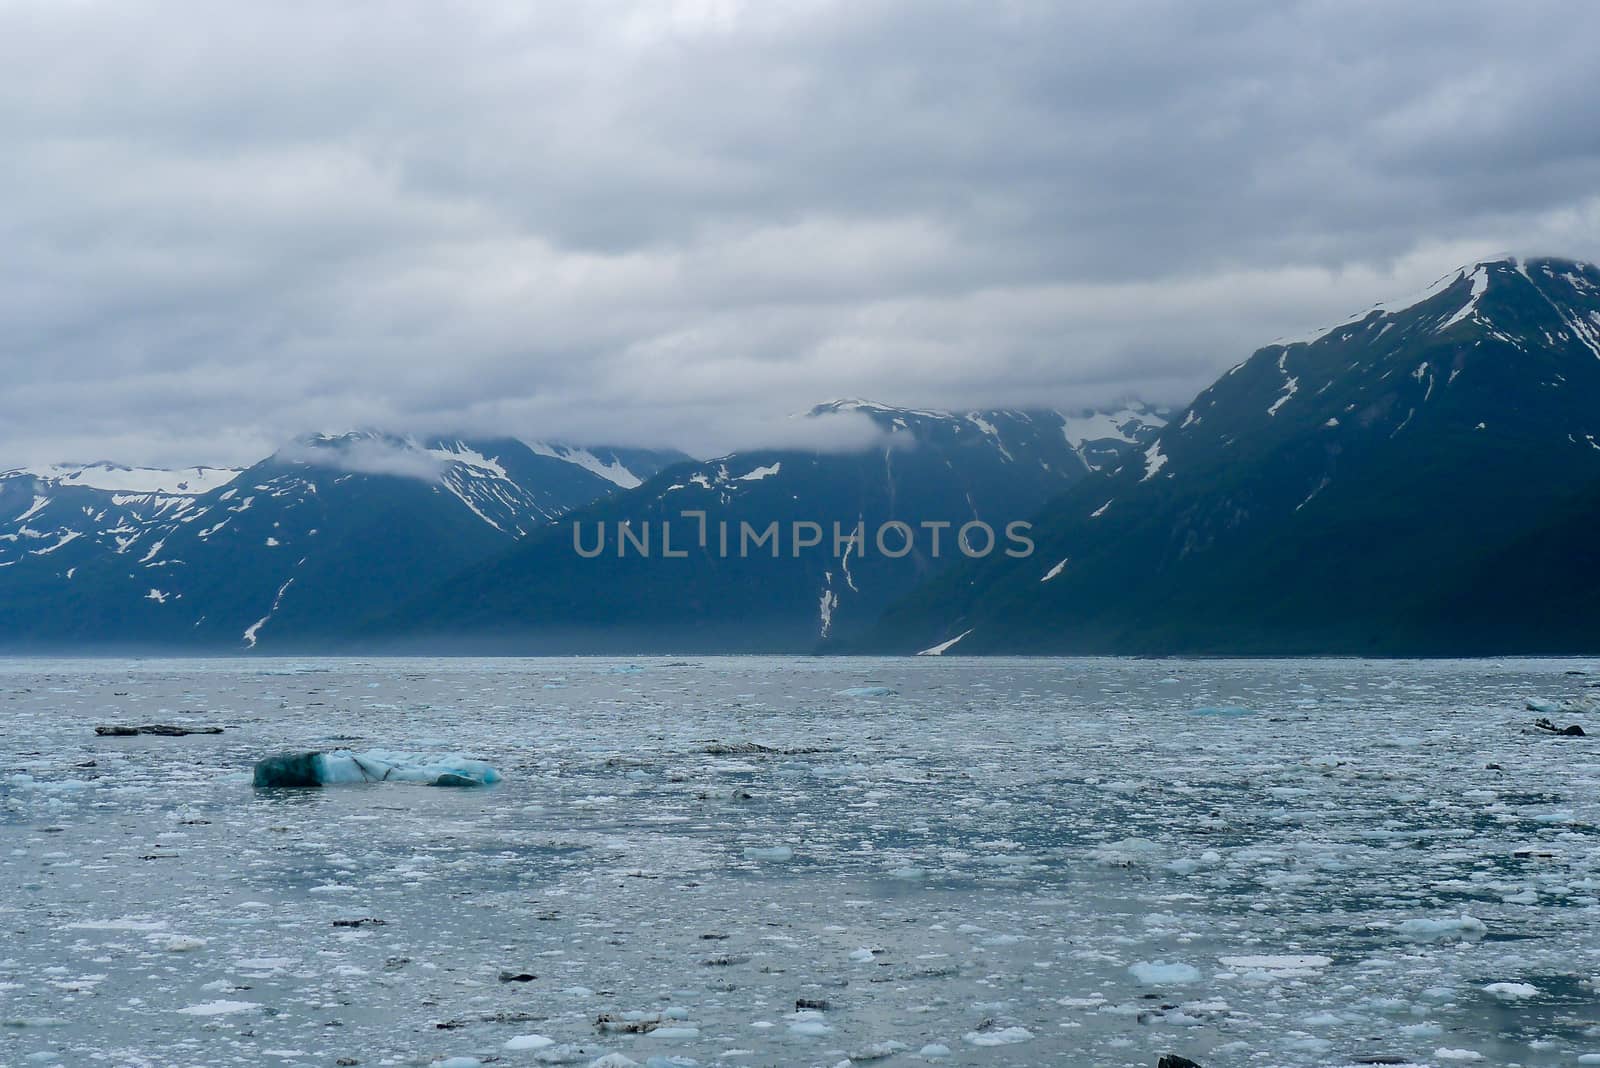 Approaching the Hubbard Glacier in Alaska by chrisukphoto